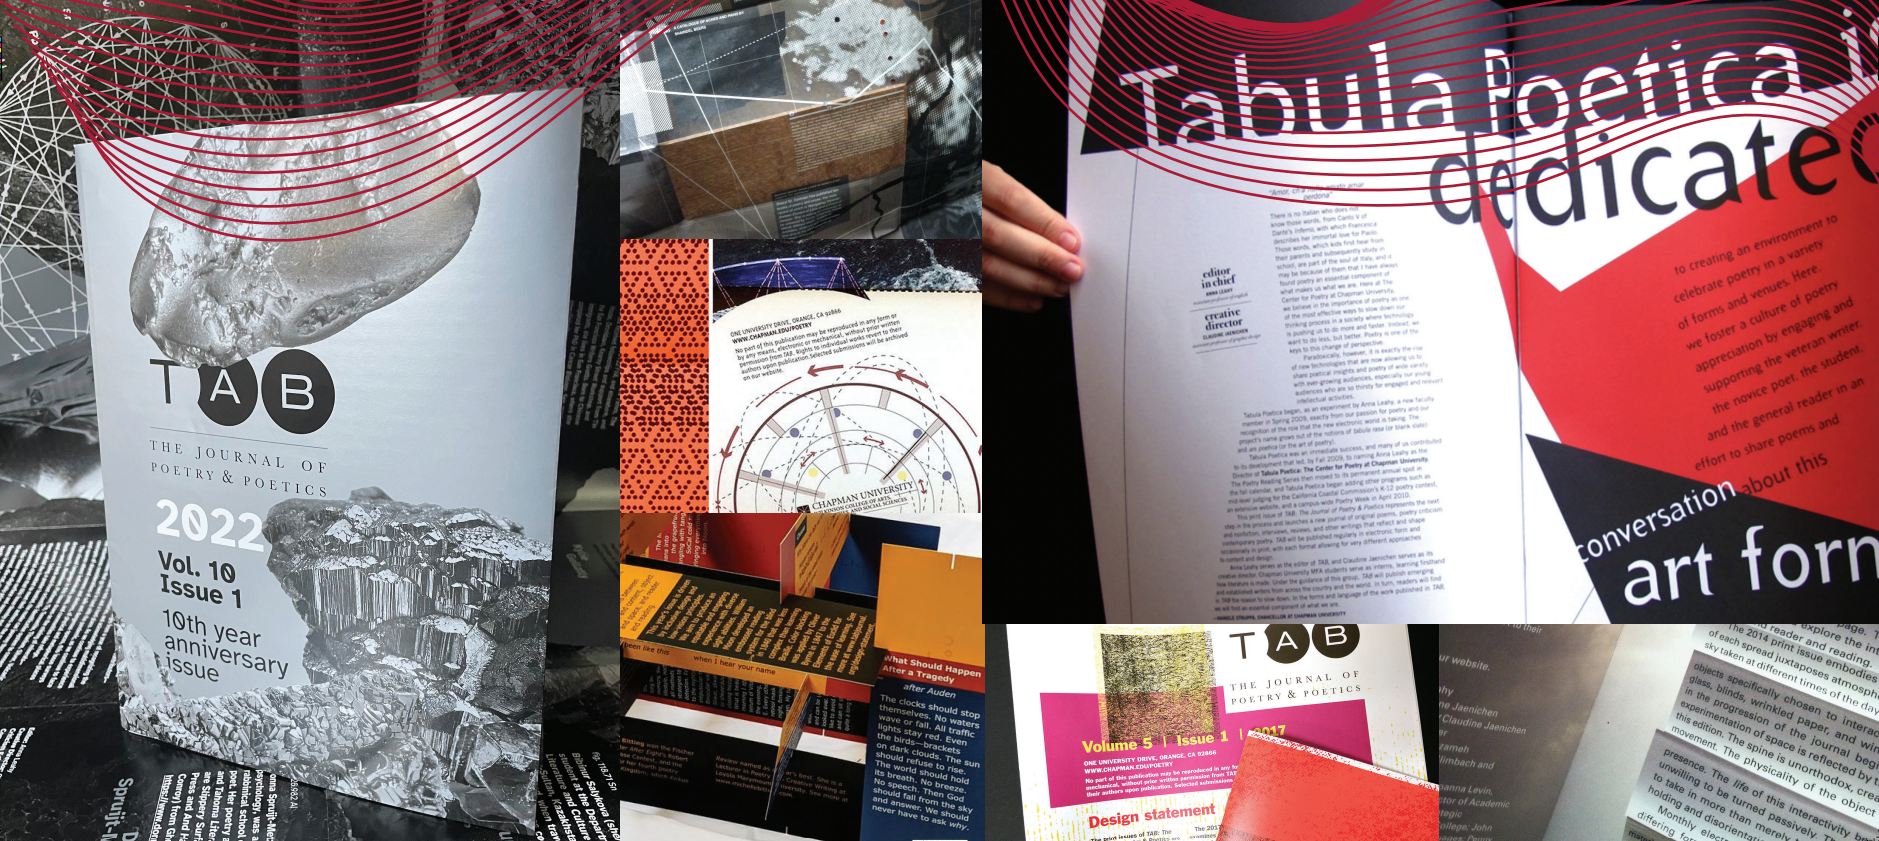 10 years of volumes from TAB journal